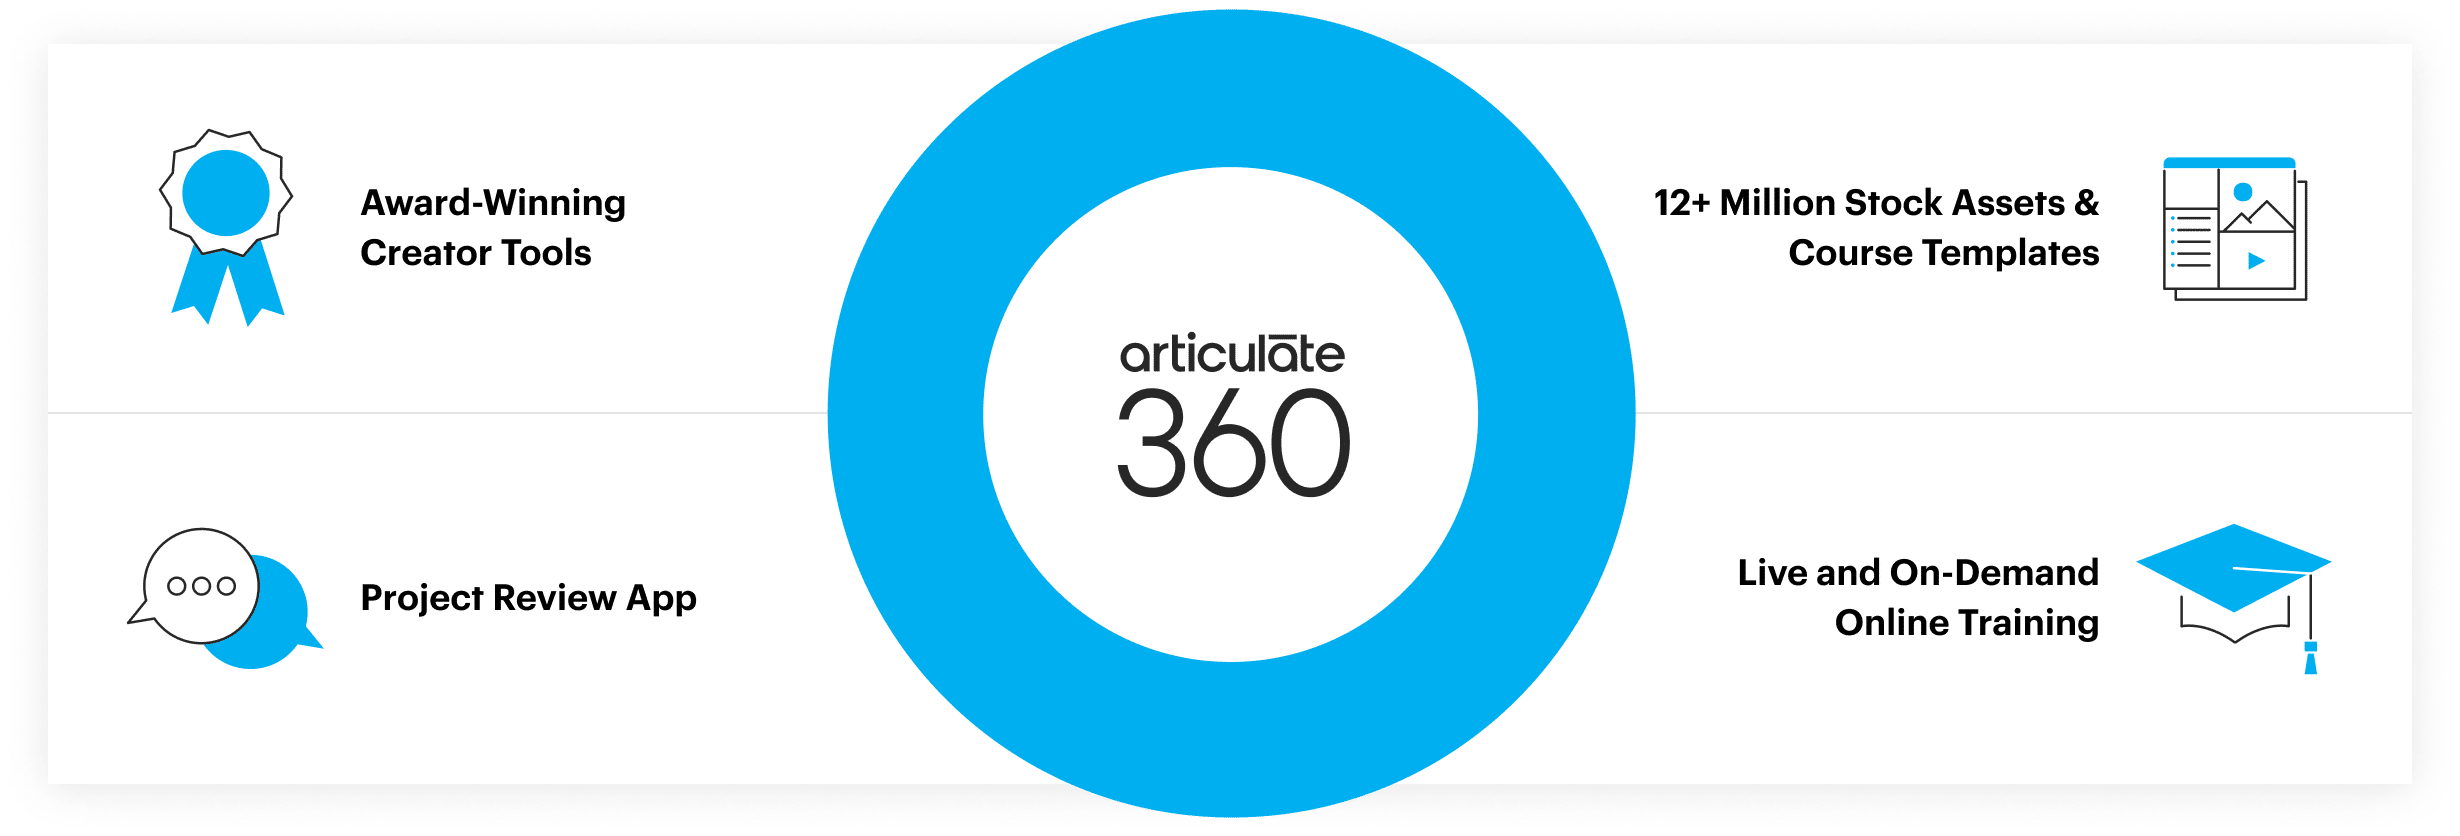 Whats included with Articulate 360